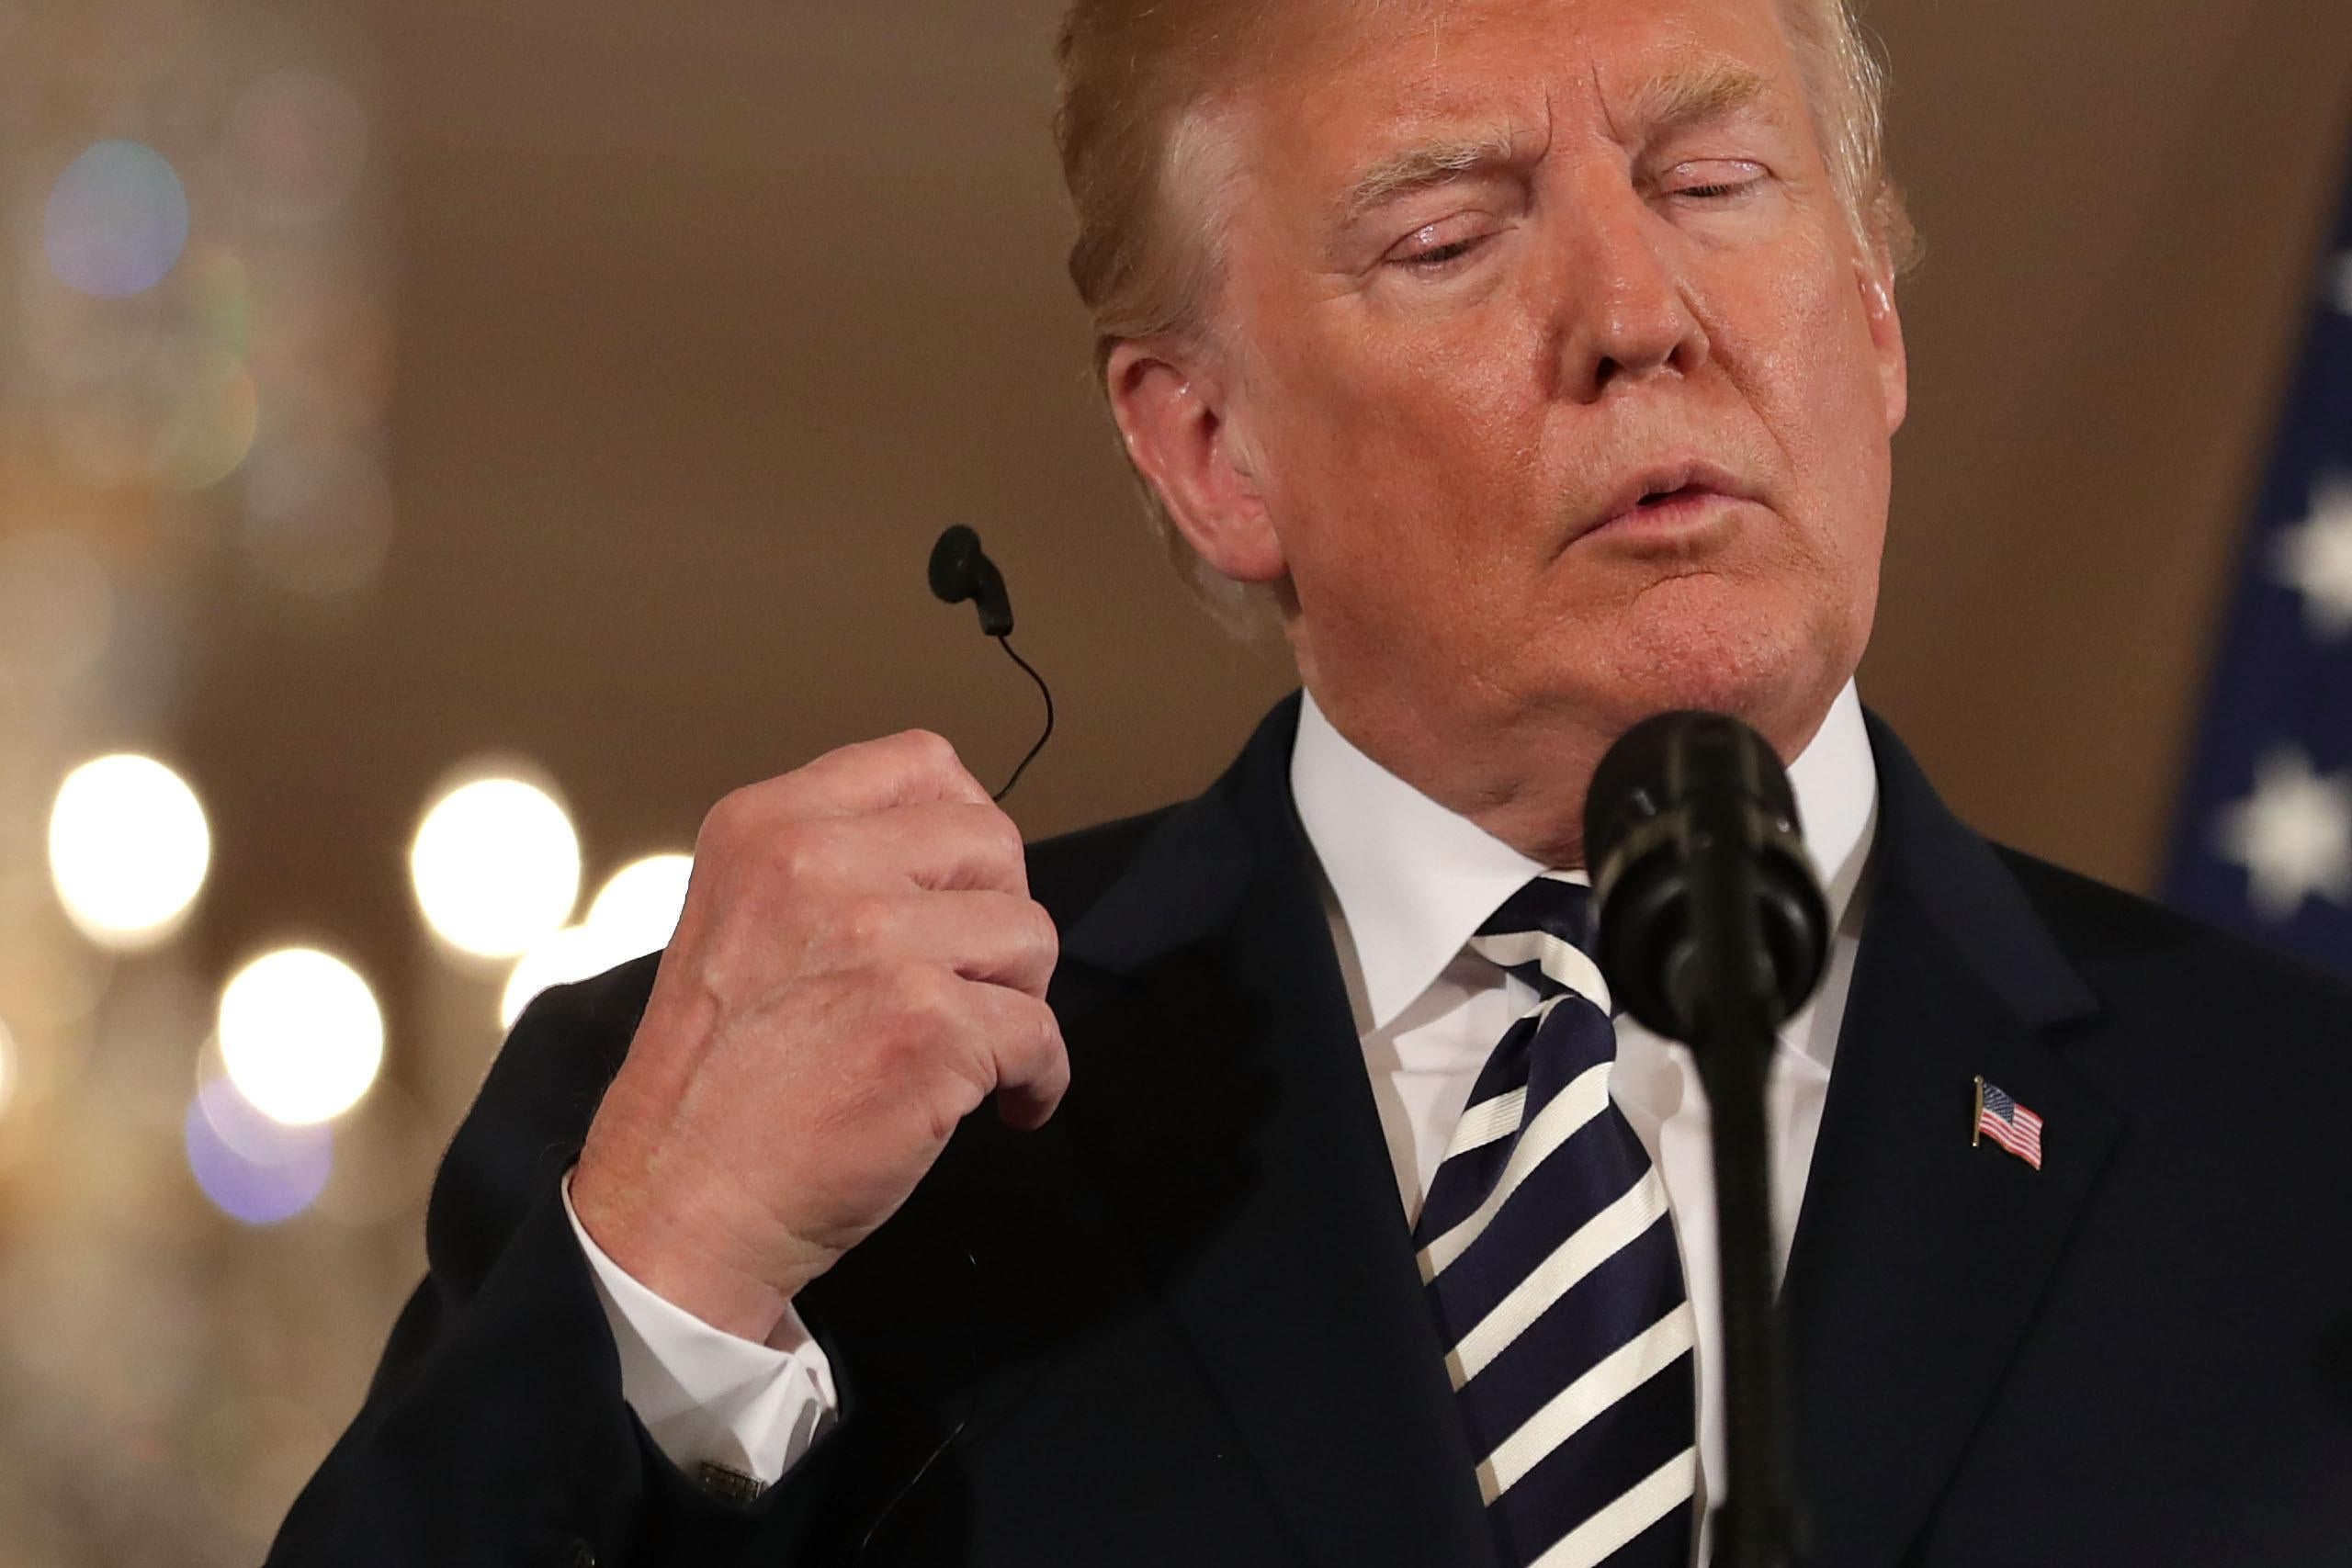 President Trump, standing at a podium, pulls an audio ear bud out of his ear during a news conference. 